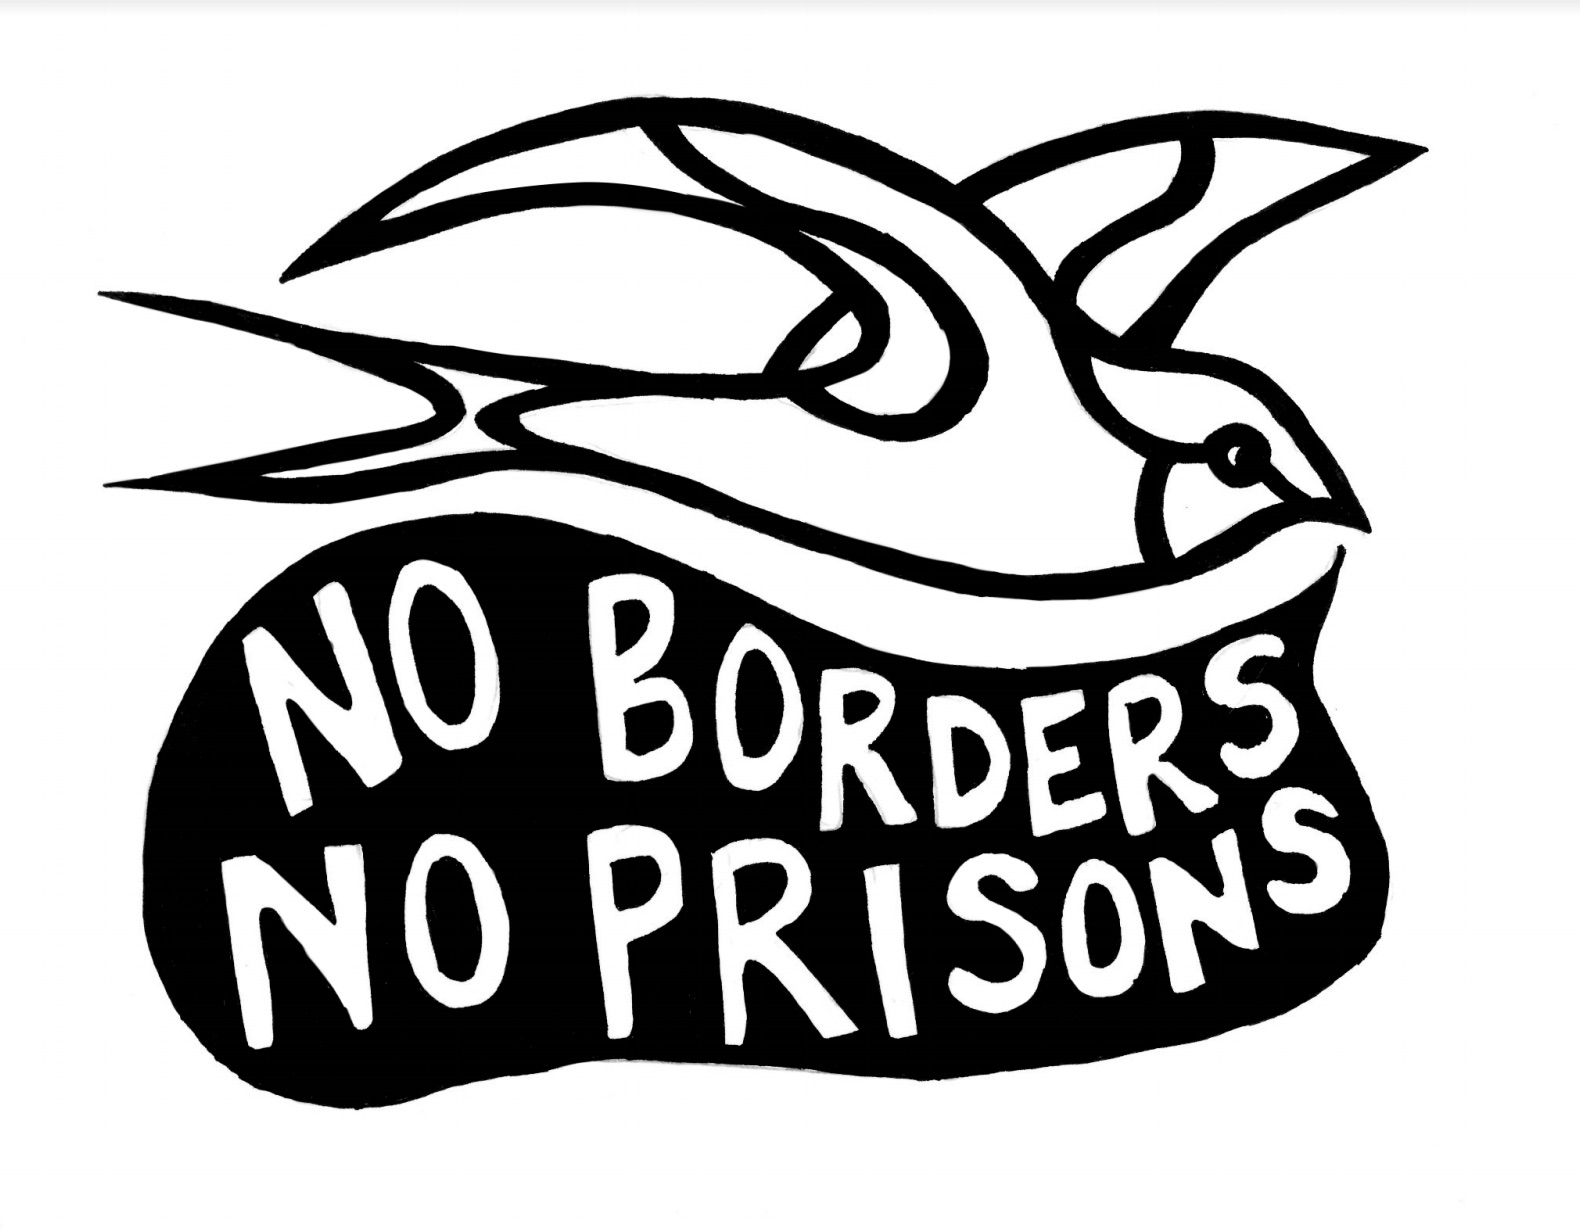 Bird flying a banner that says 'NO BORDERS NO PRISONS'